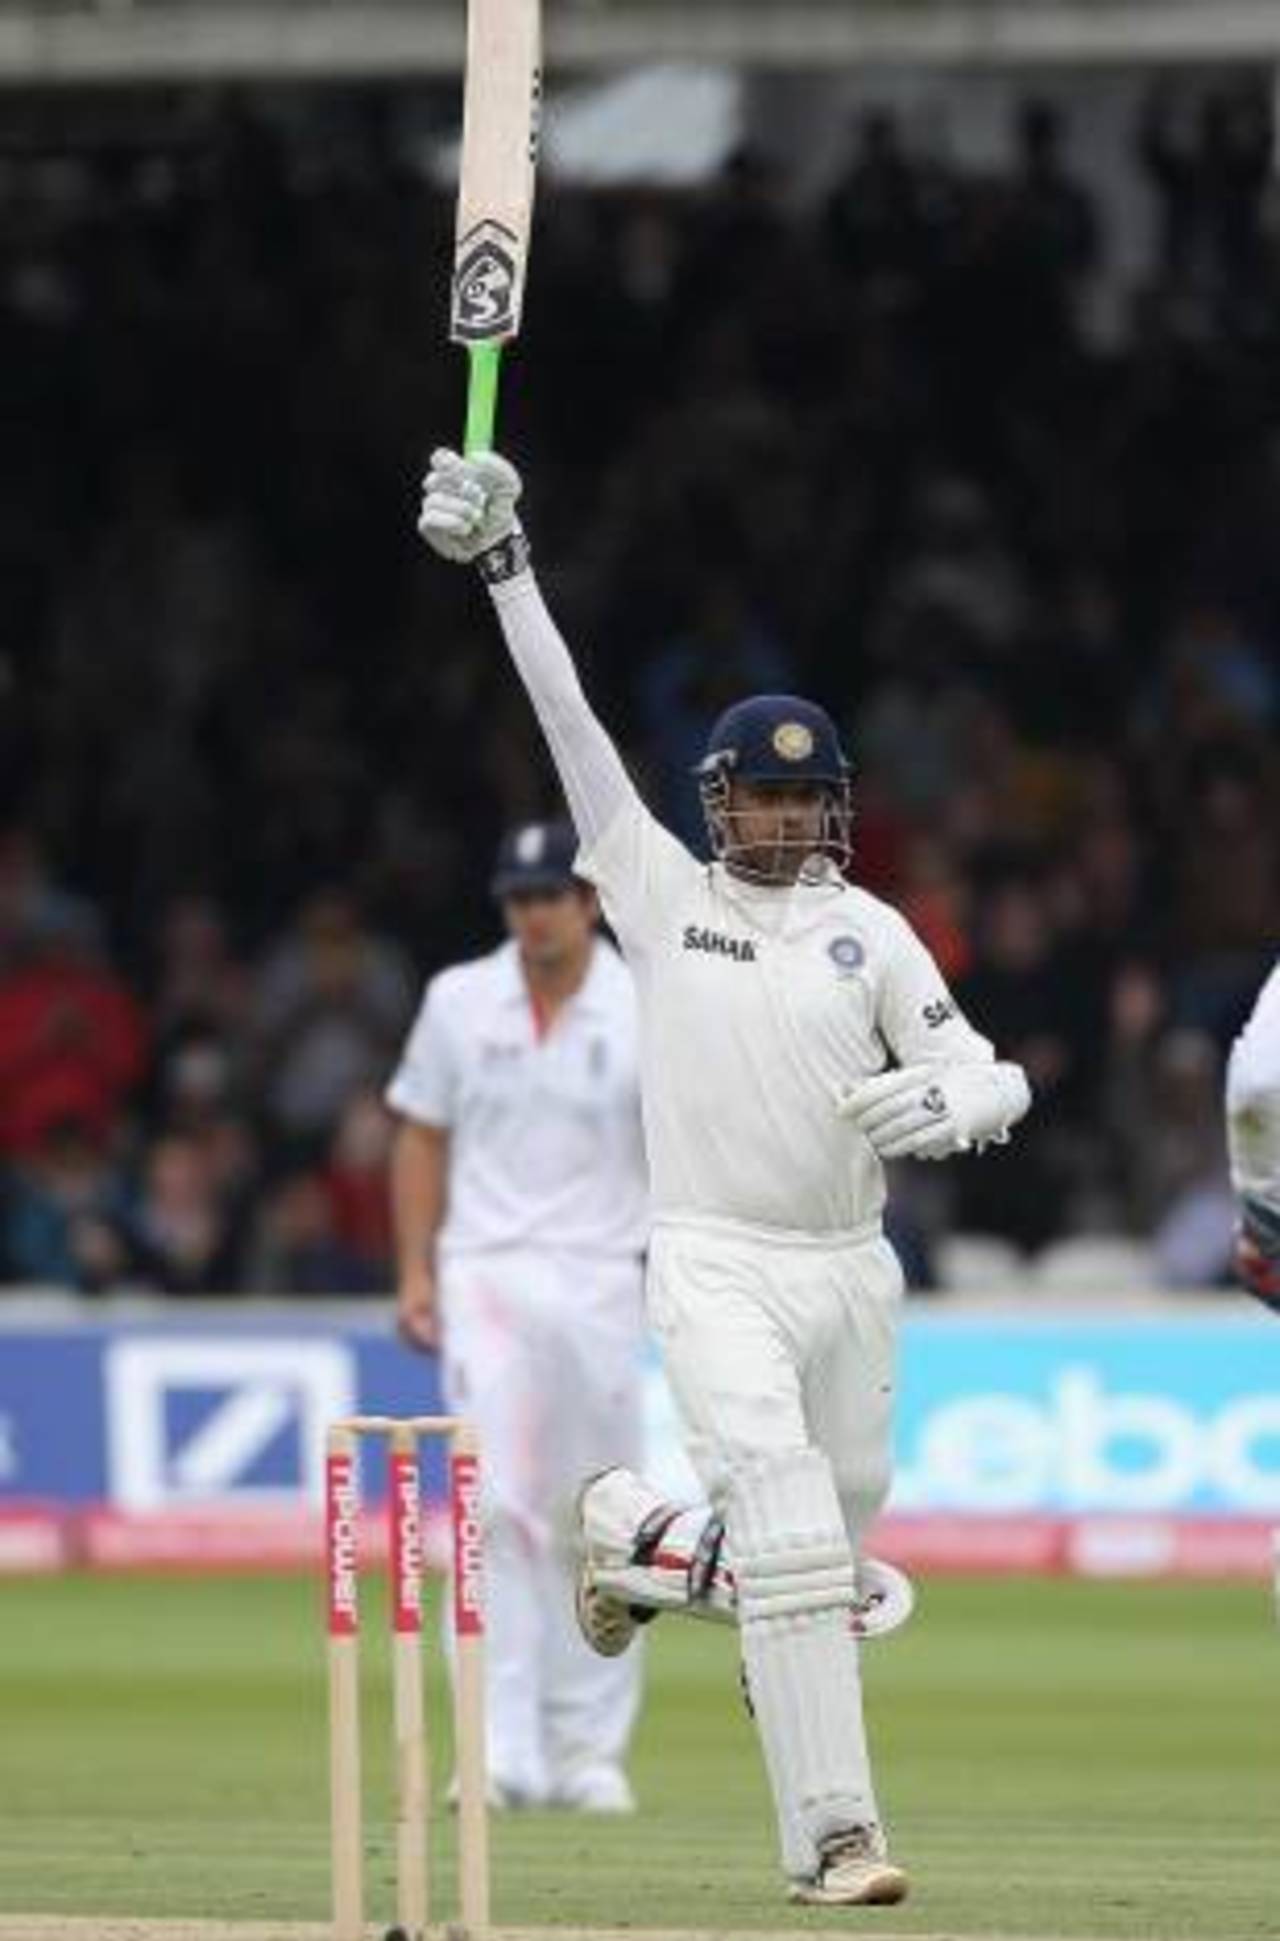 Rahul Dravid celebrated with real emotion as he finally registered a Lord's hundred&nbsp;&nbsp;&bull;&nbsp;&nbsp;Getty Images